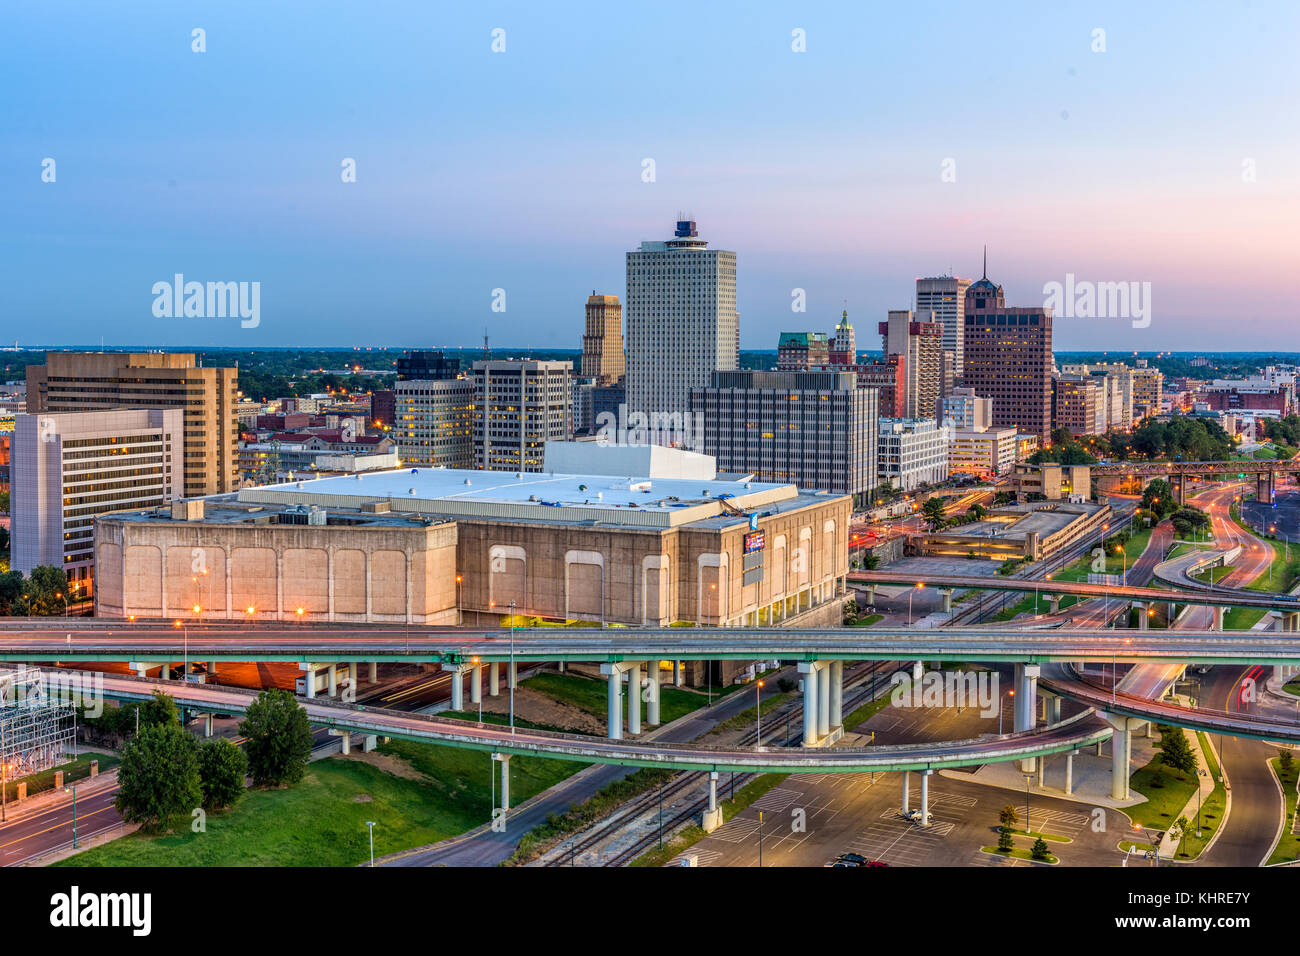 Memphis, Tennessee, USA downtown skyline at dusk. Stock Photo